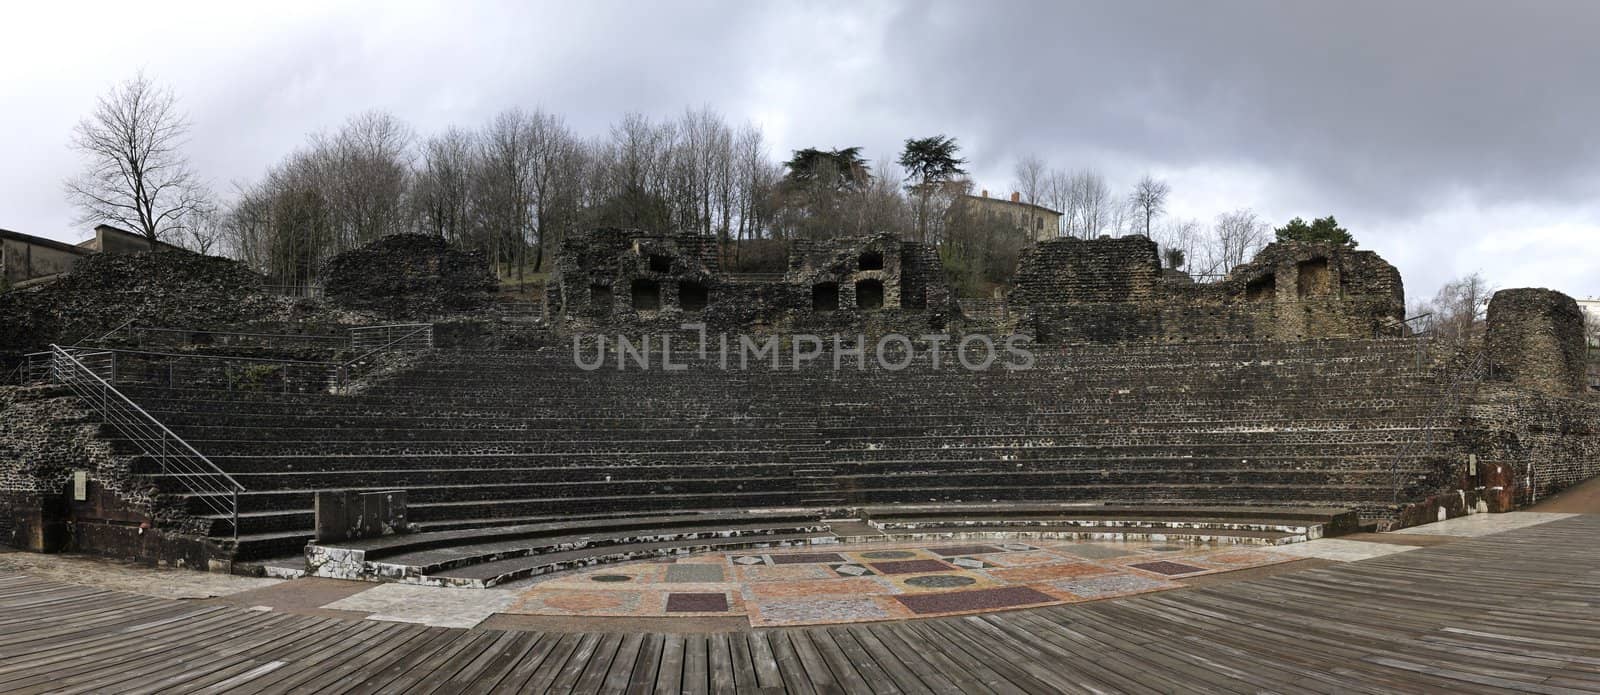 Panoramic view of an old Roman theatre in Lyon city by shkyo30